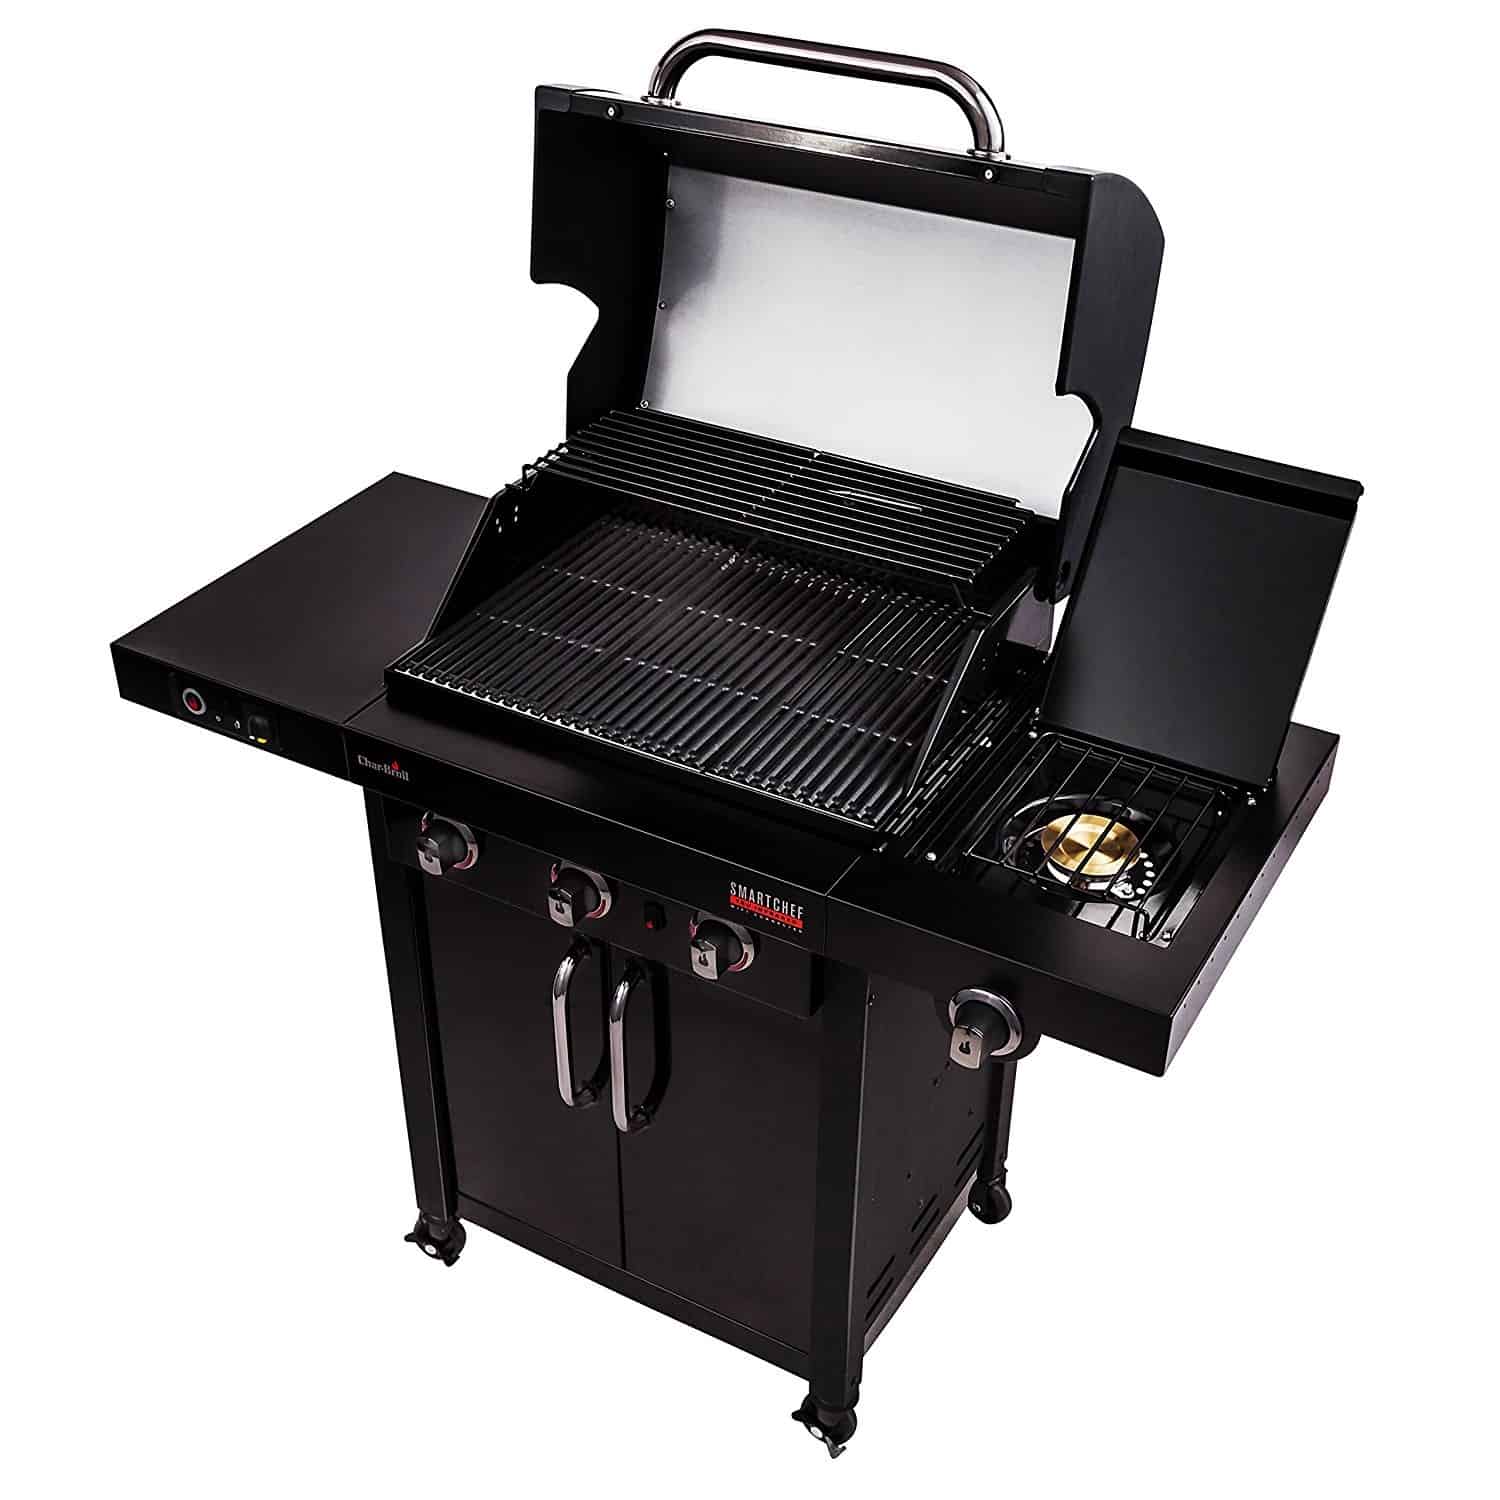 Savvy and smart cooking Grills - Kitchen Gadgets